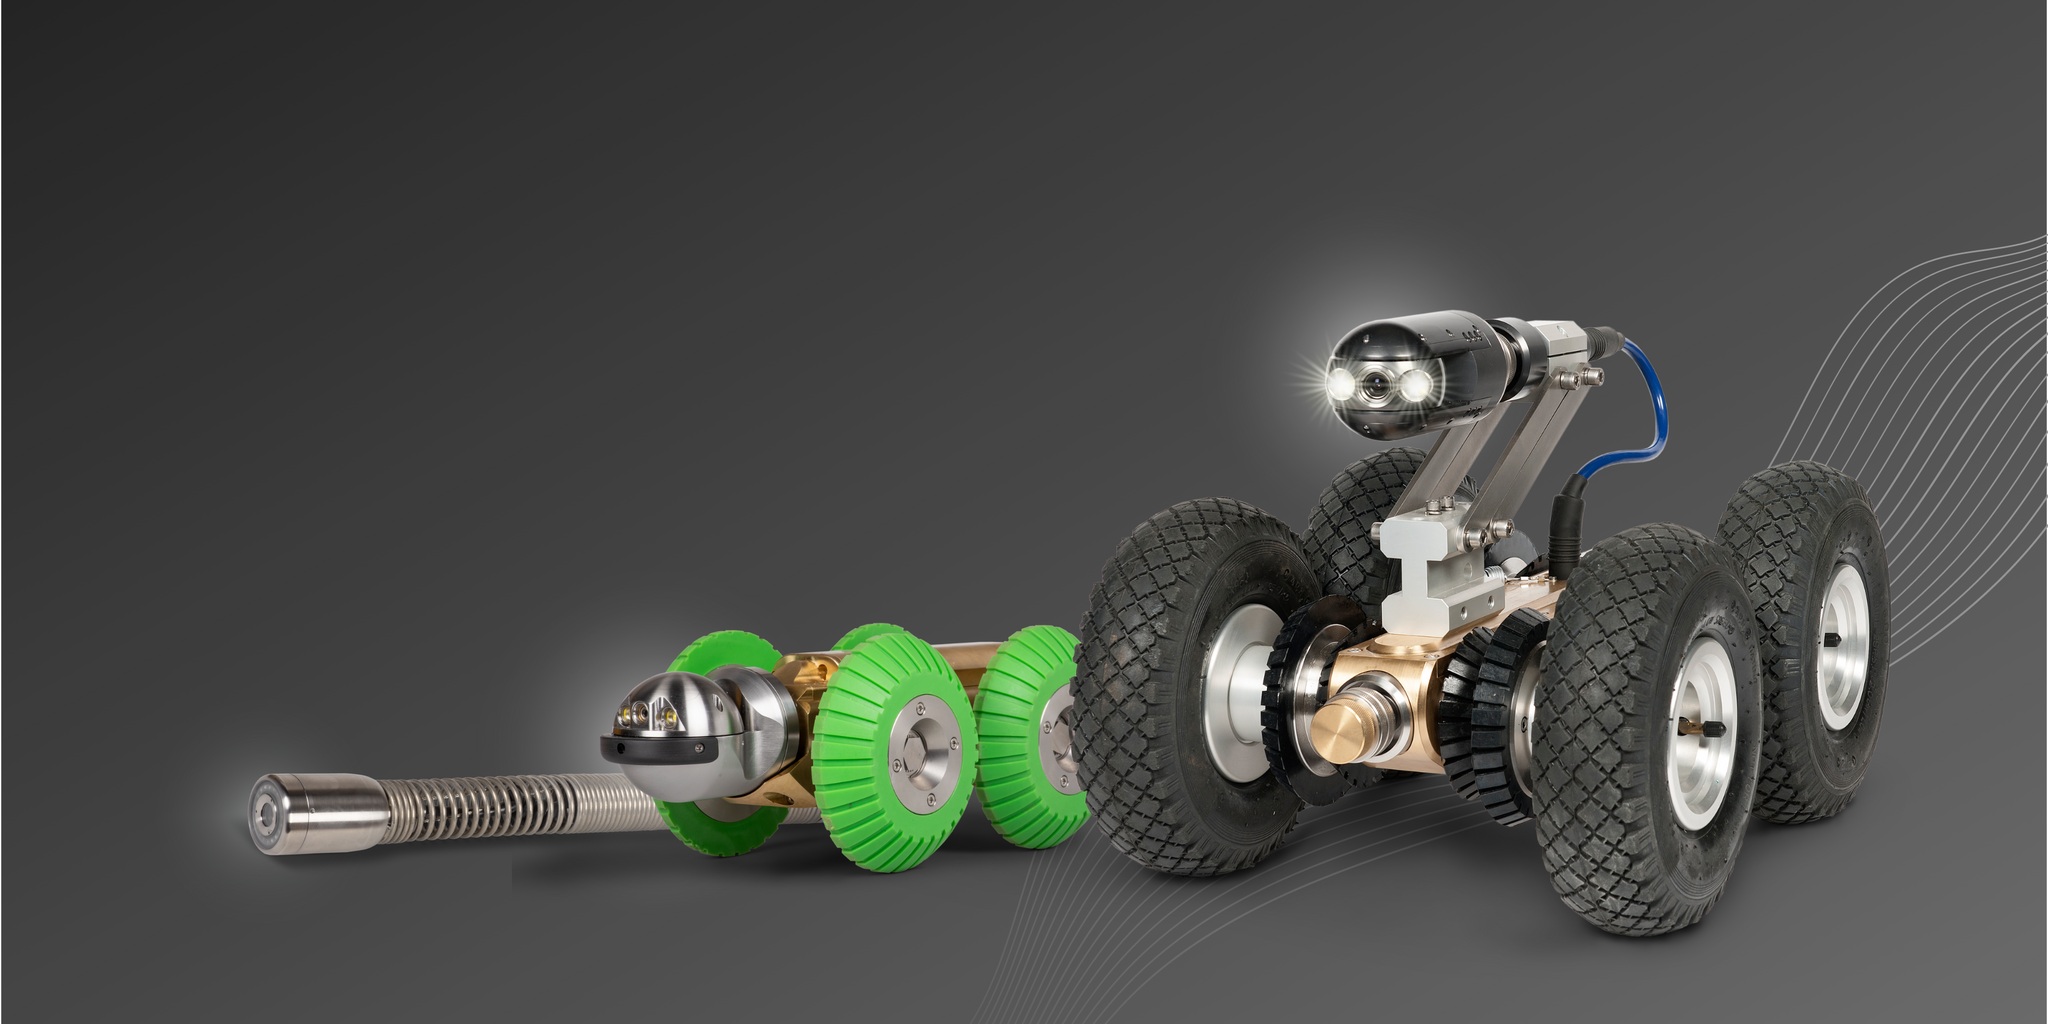 Sewer Camera, Small Pipe Robot and Pipe Crawler Placed in a Row